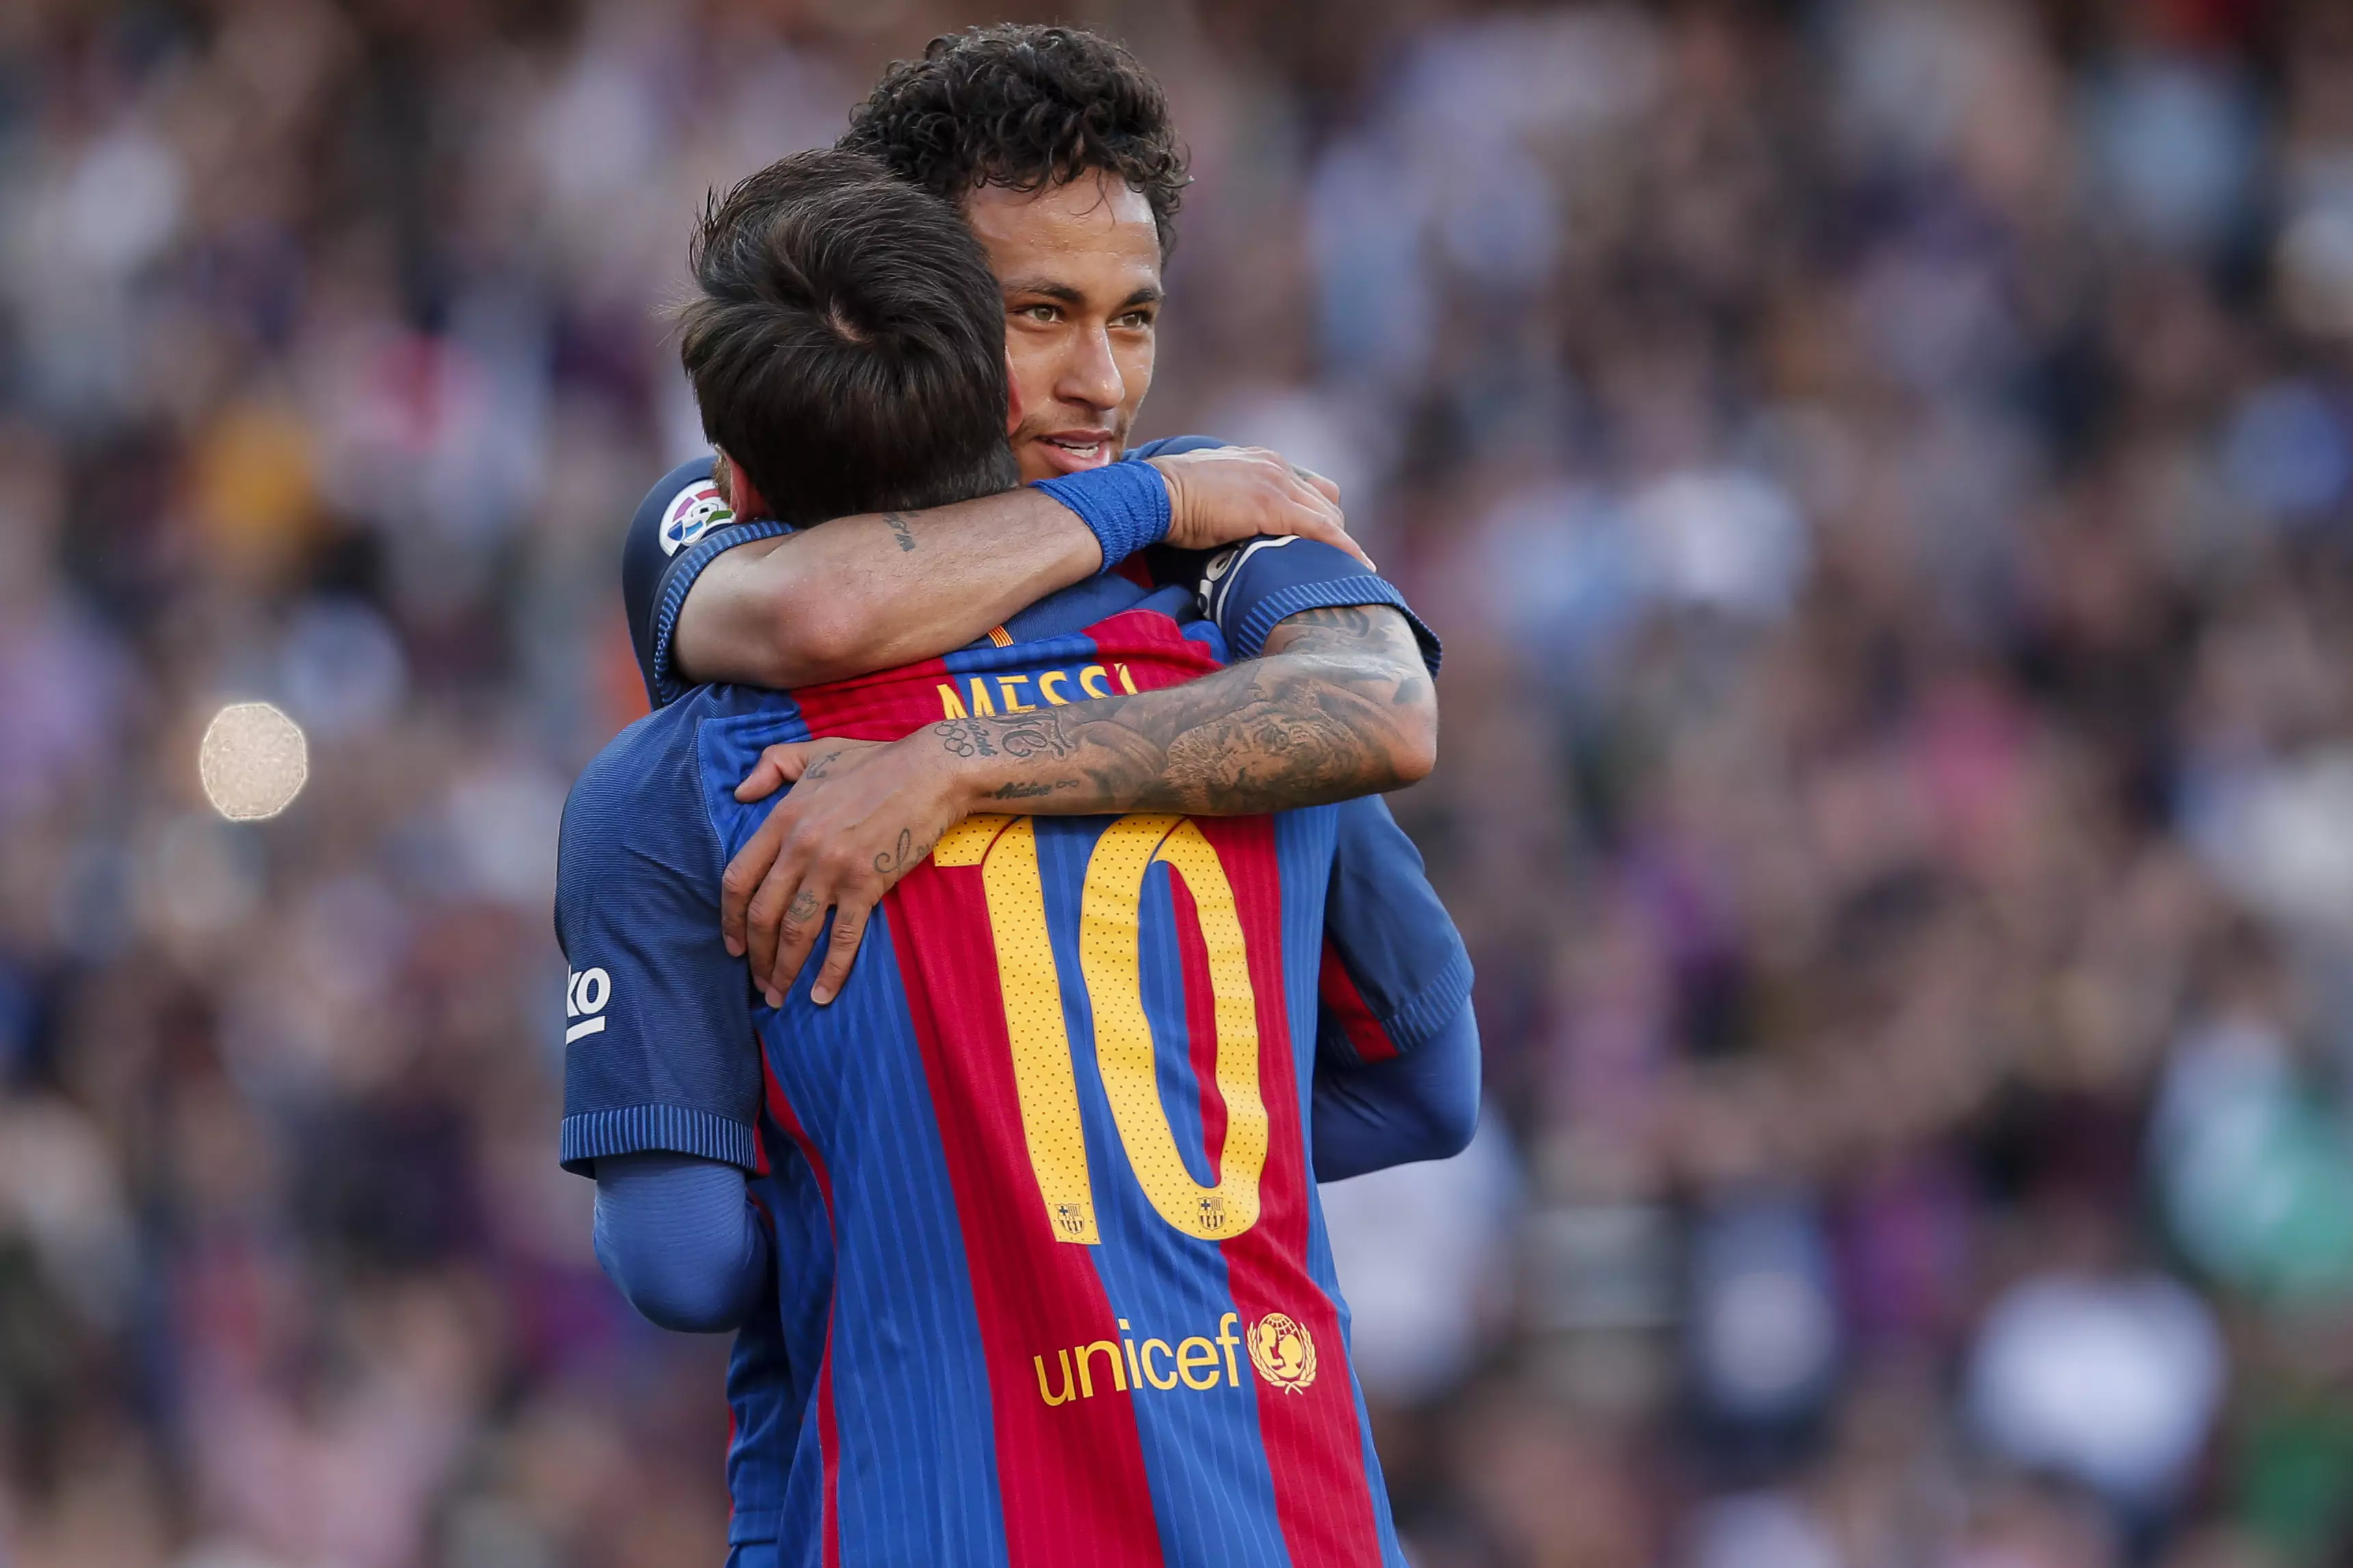 Could the return of Neymar keep Messi at the club? Image: PA Images